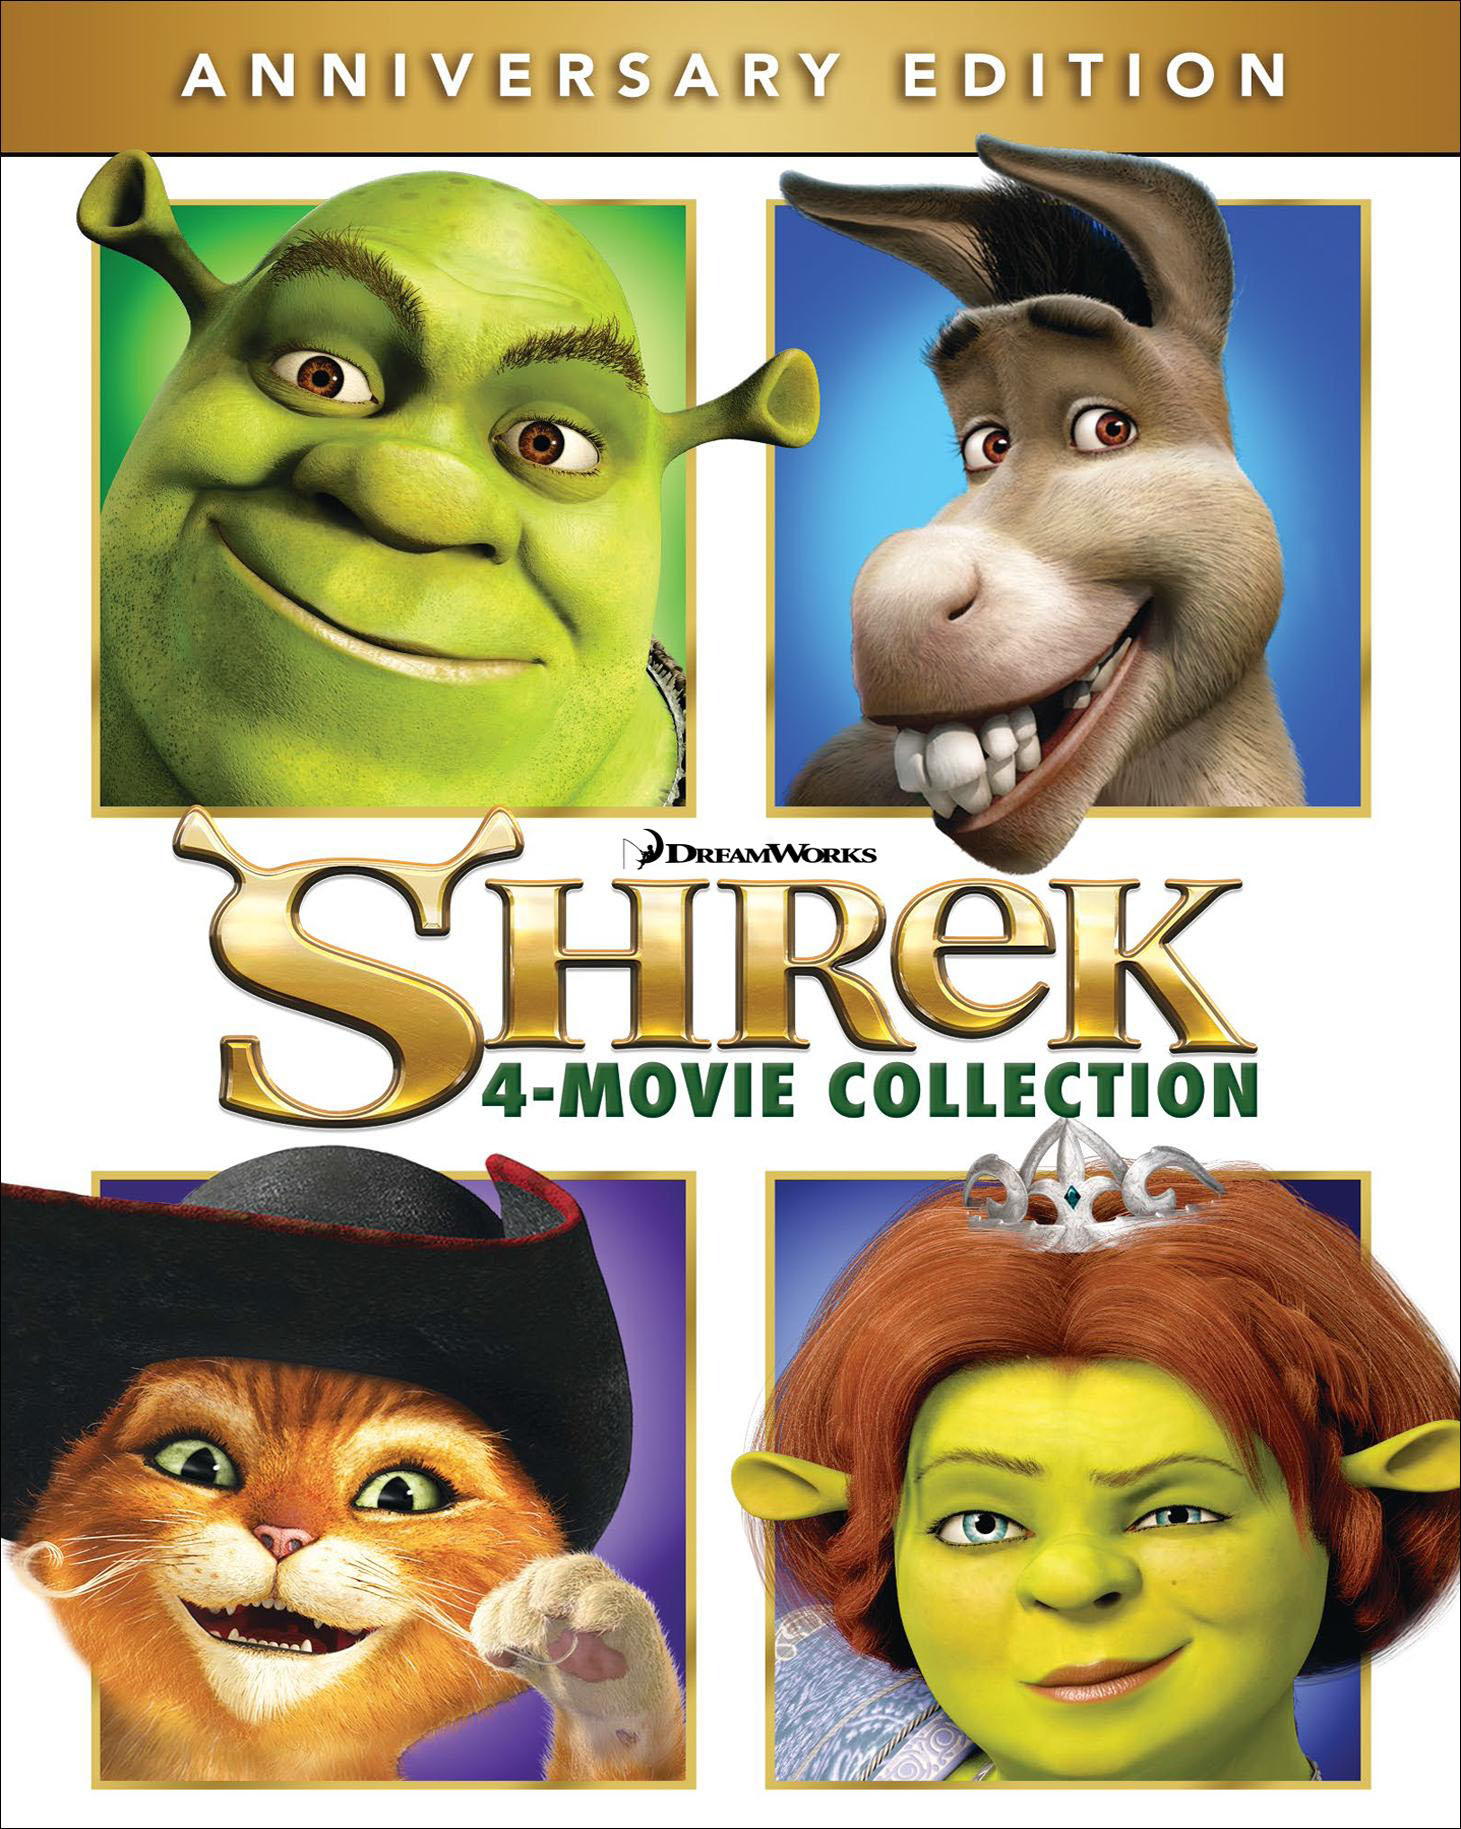 Shrek 4-Movie Collection (Blu-ray) - image 1 of 3